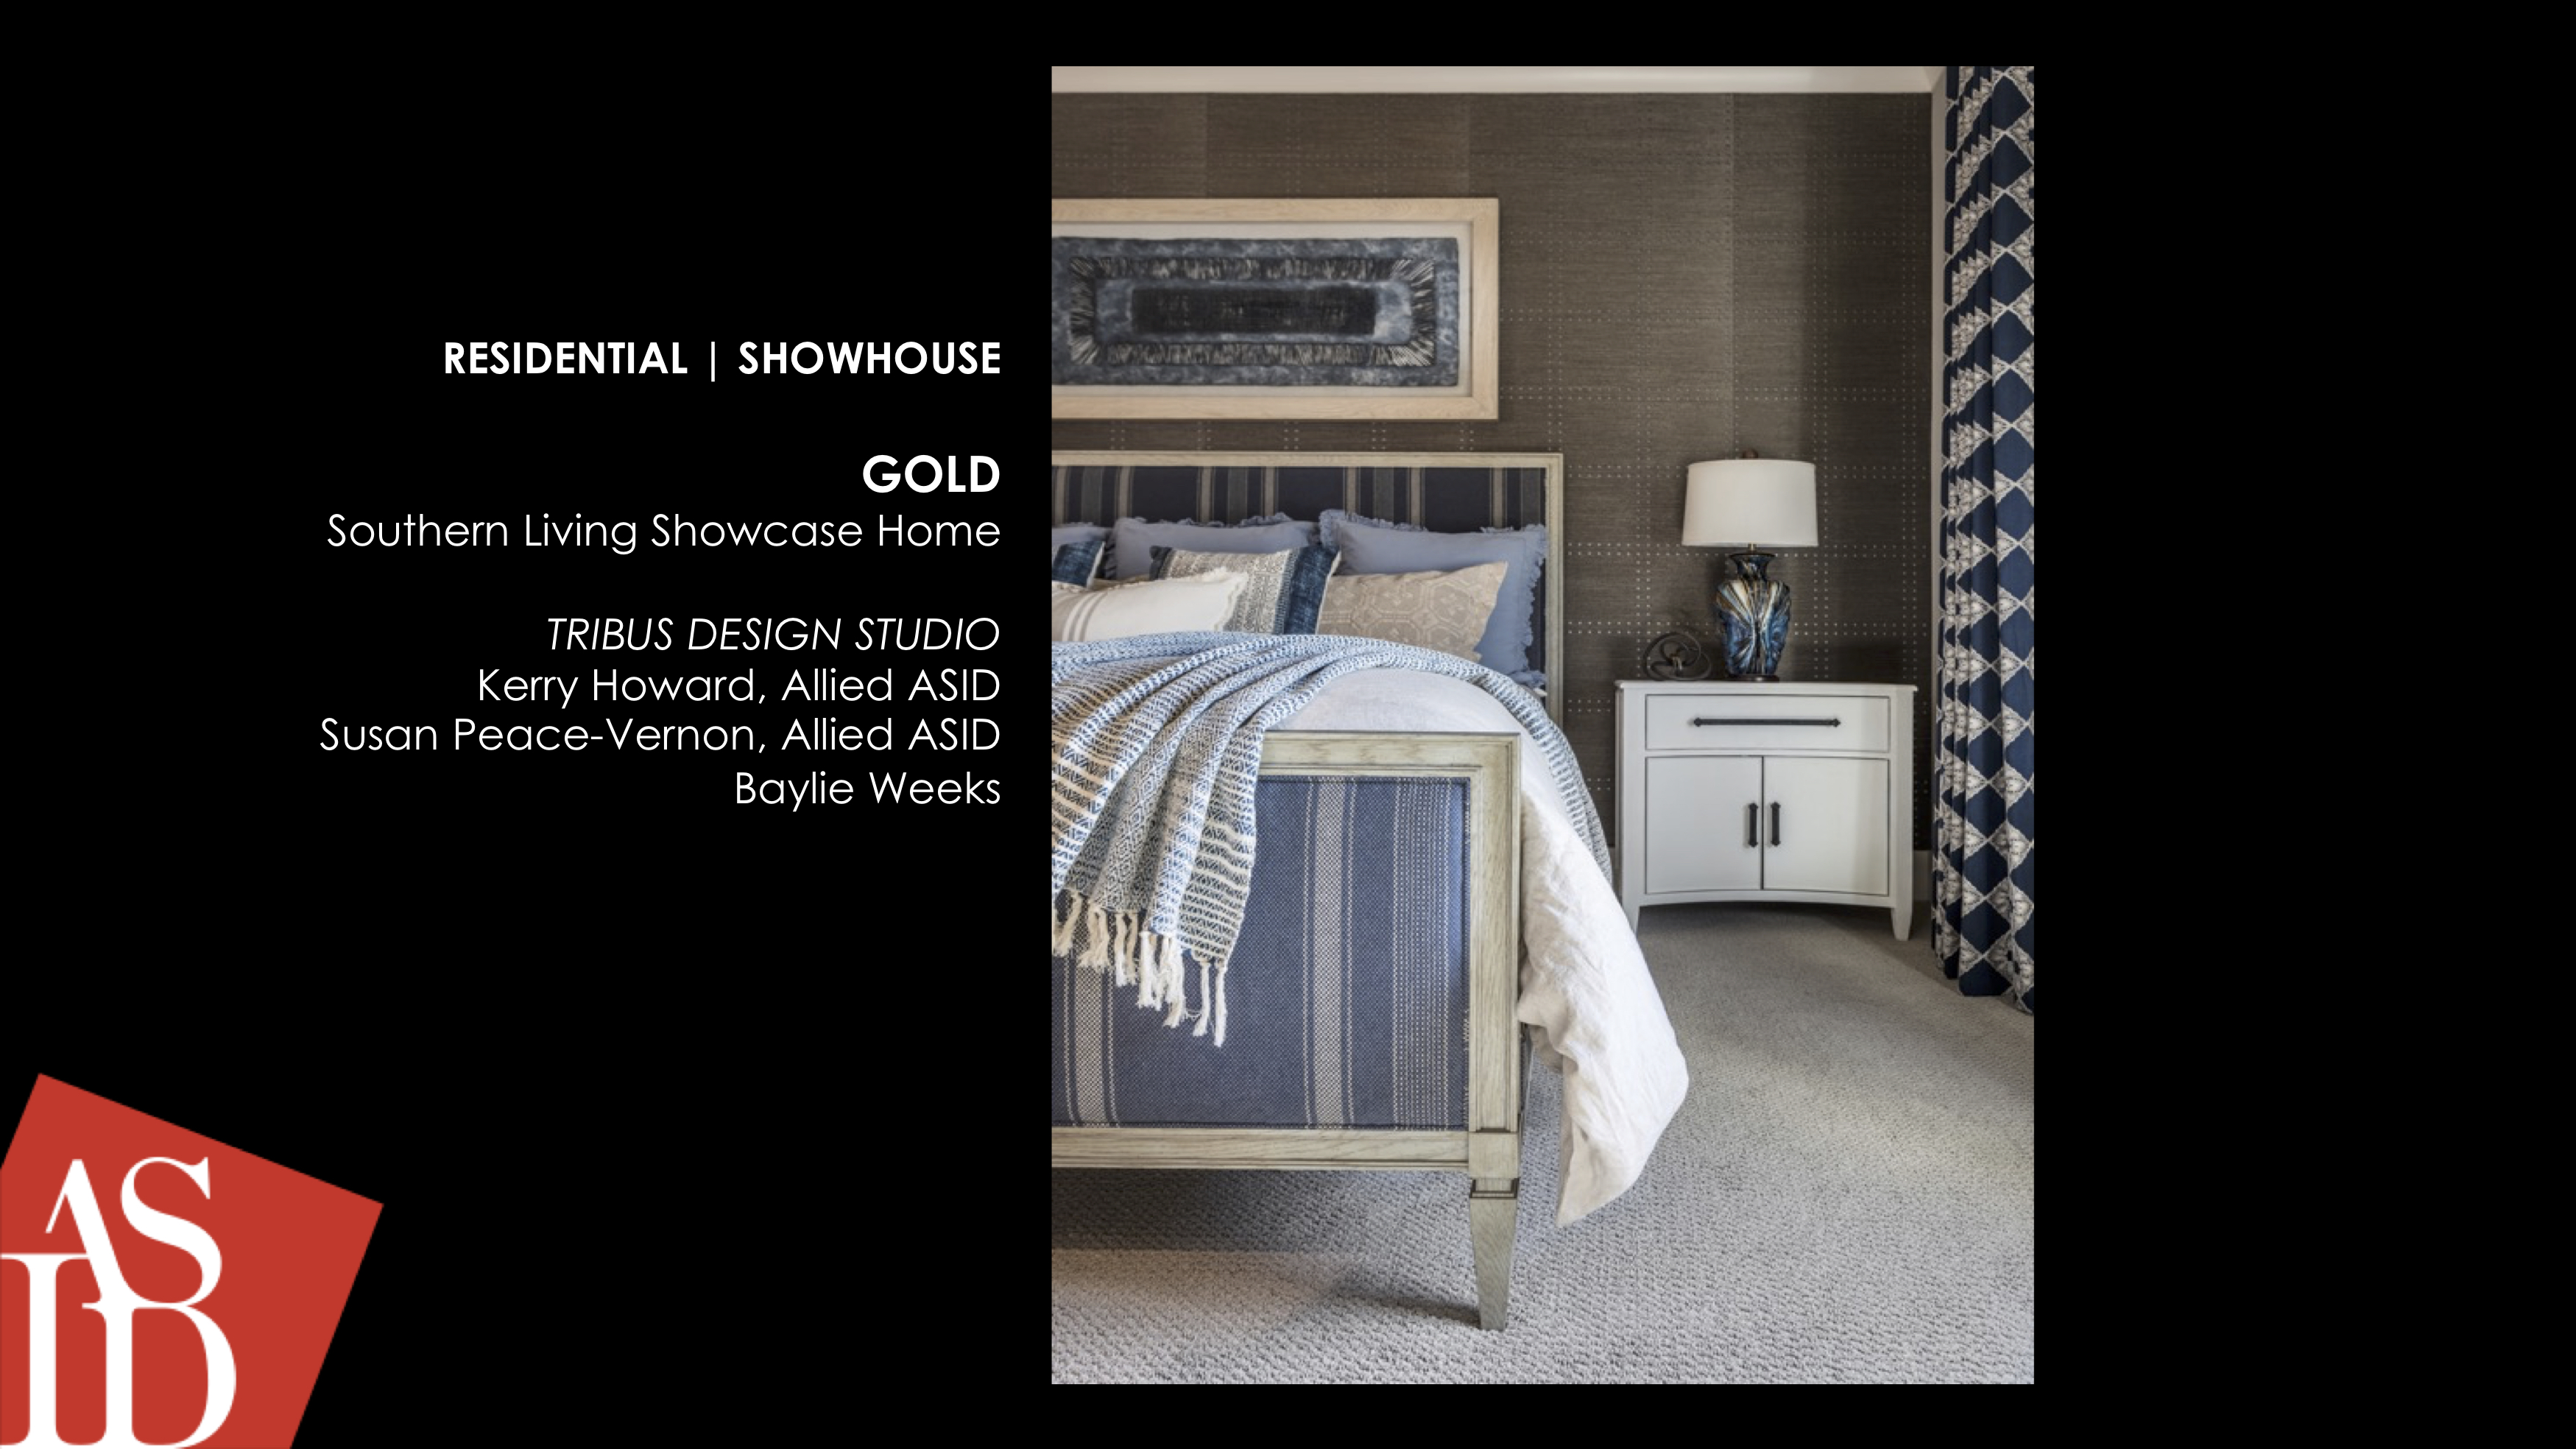 SHOW HOUSE | GOLD